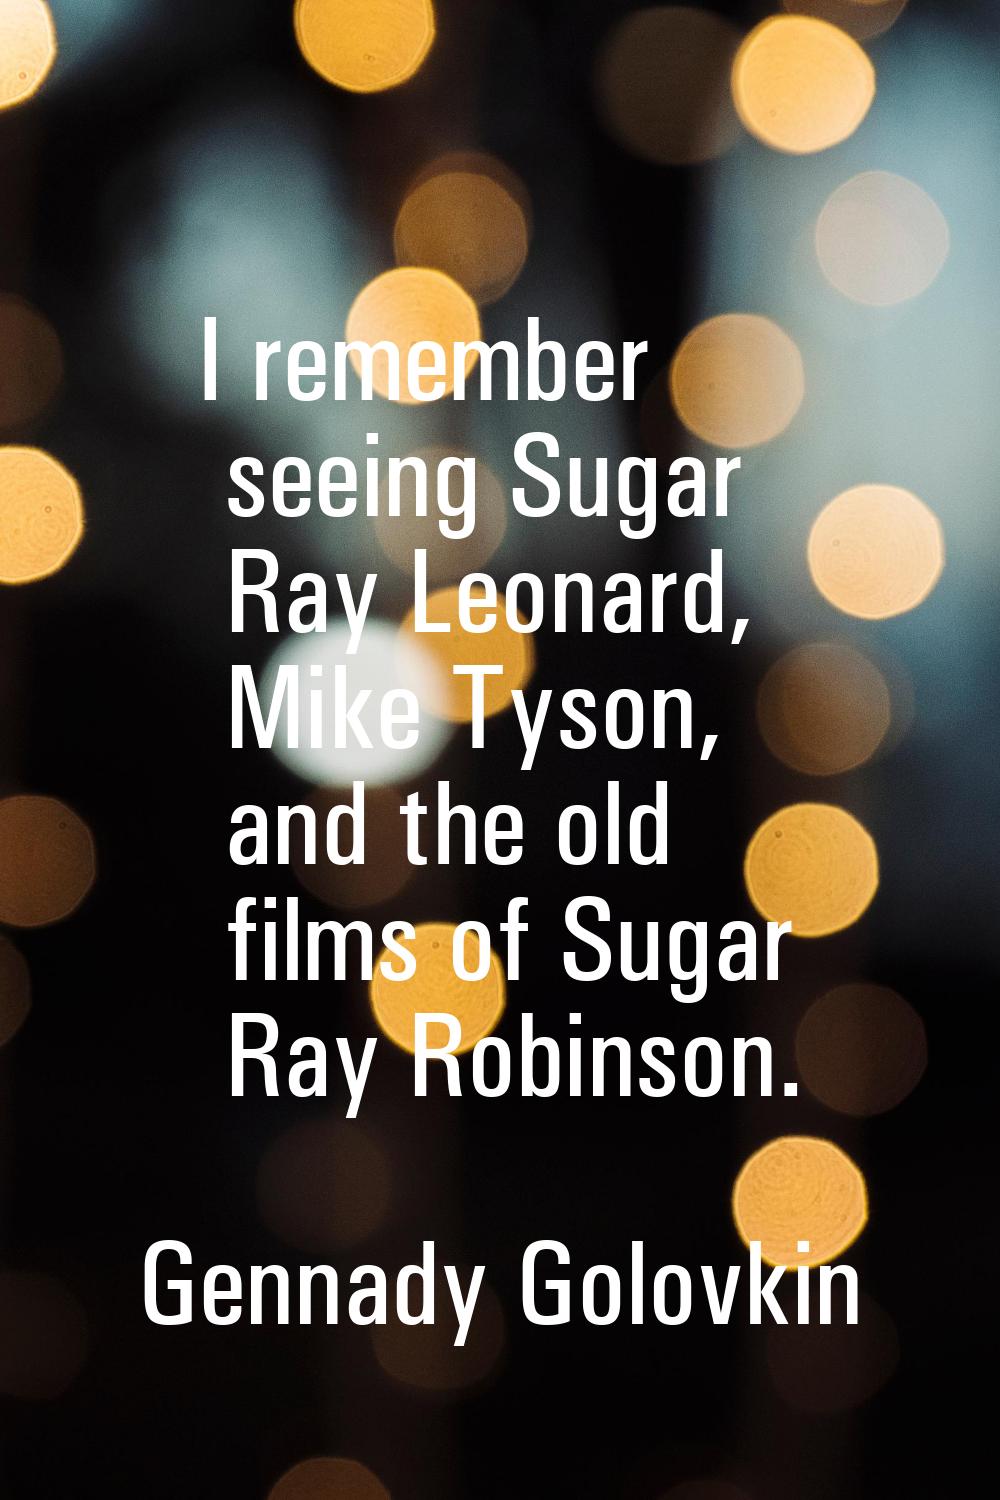 I remember seeing Sugar Ray Leonard, Mike Tyson, and the old films of Sugar Ray Robinson.